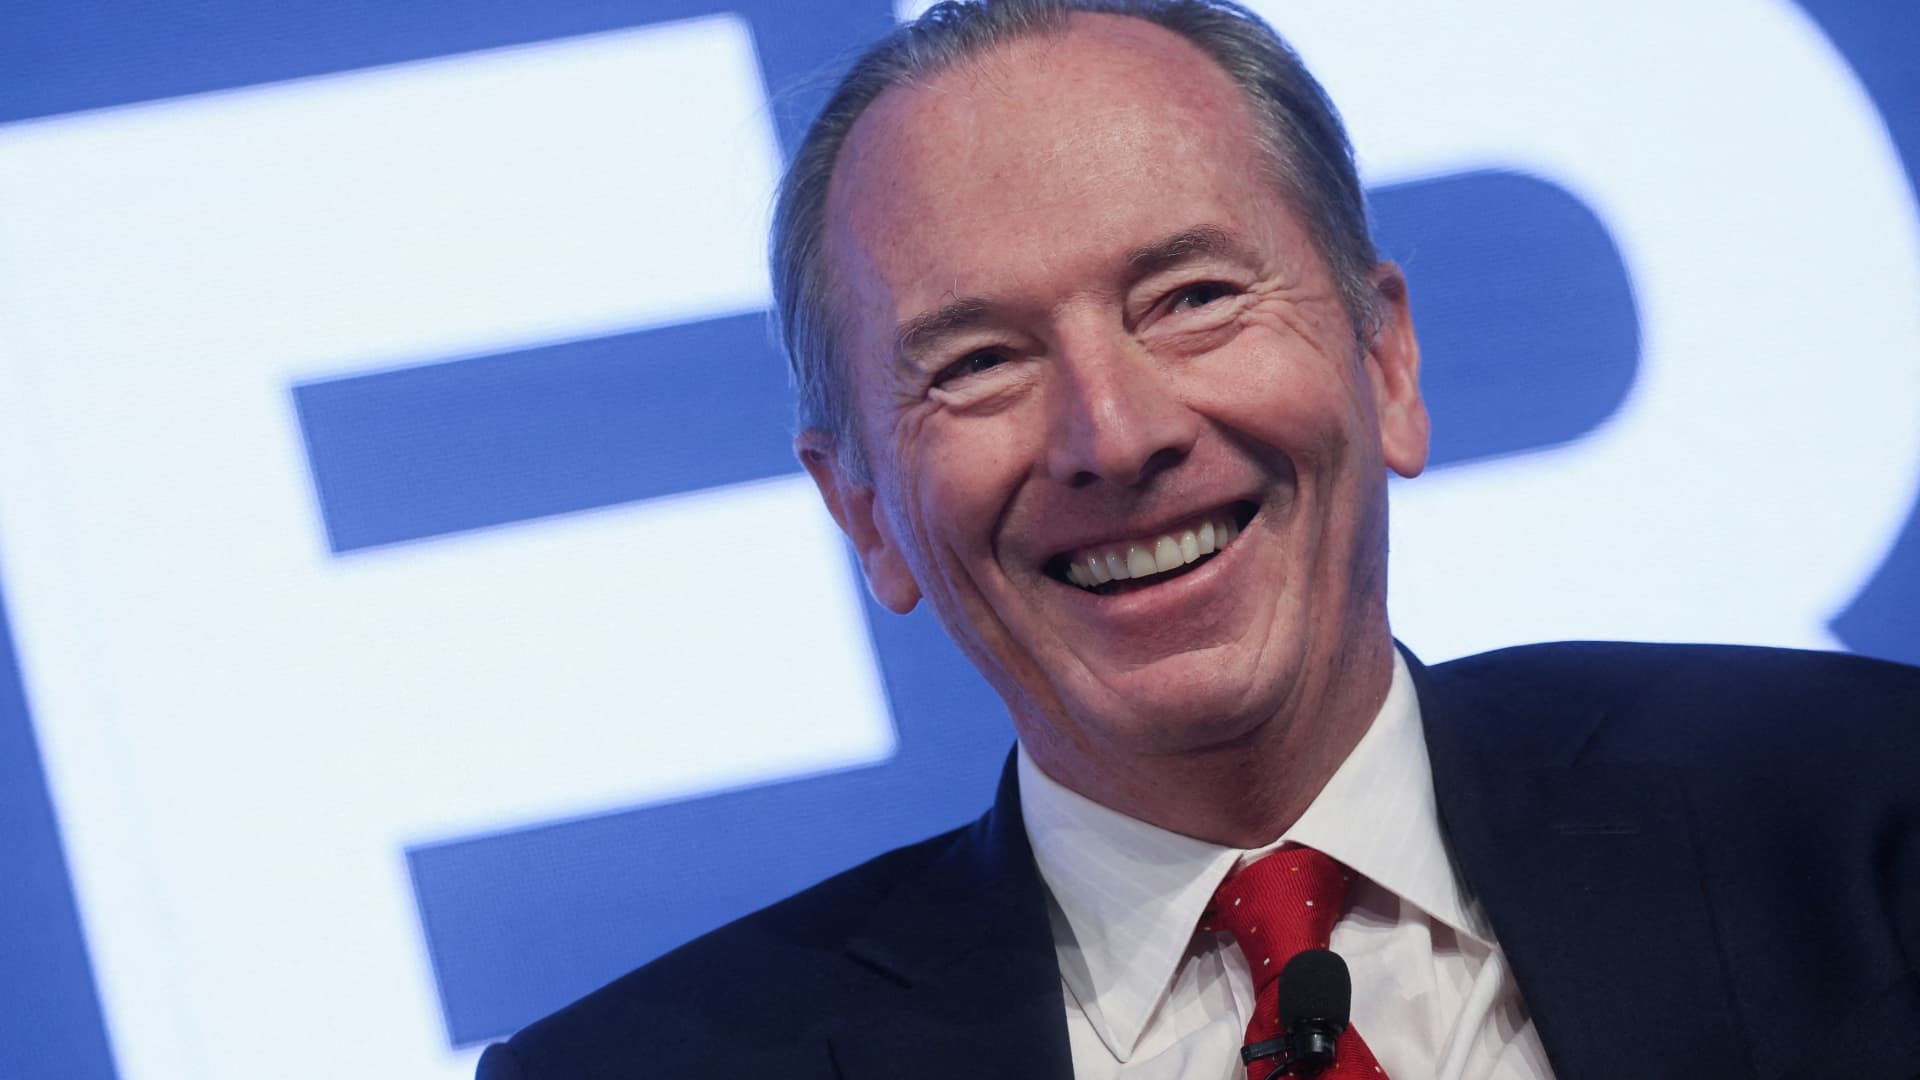 Morgan Stanley CEO plans to step down within the year, sparking Wall Street succession race